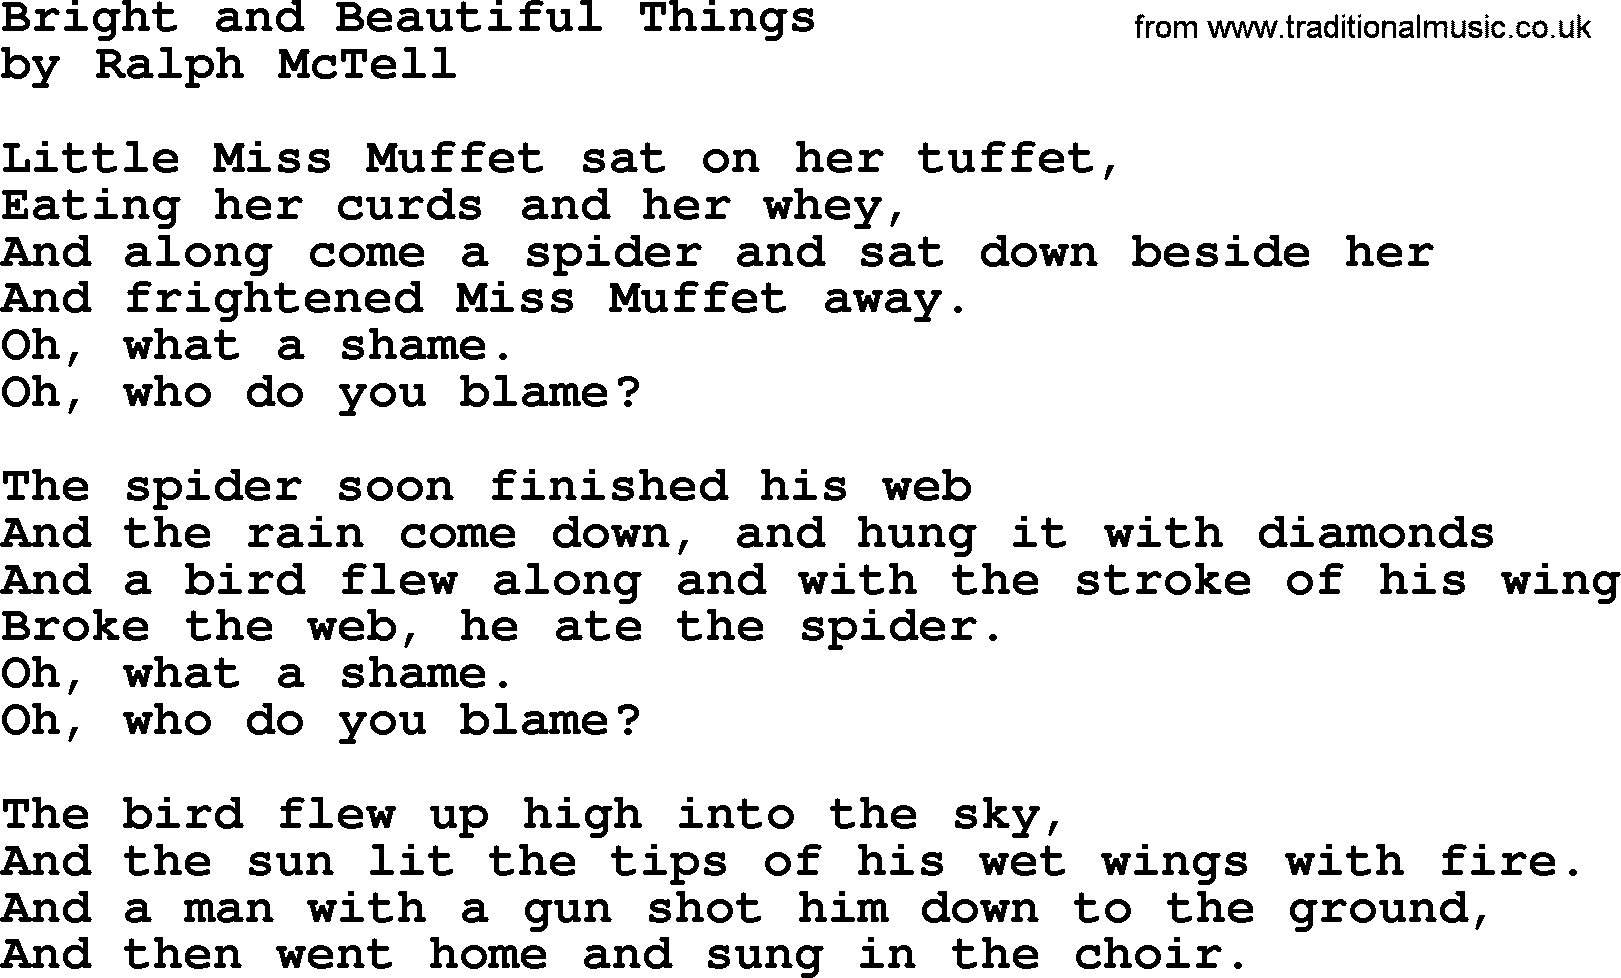 Beautiful Things Chords Bright And Beautiful Thingstxt Ralph Mctell Lyrics And Chords